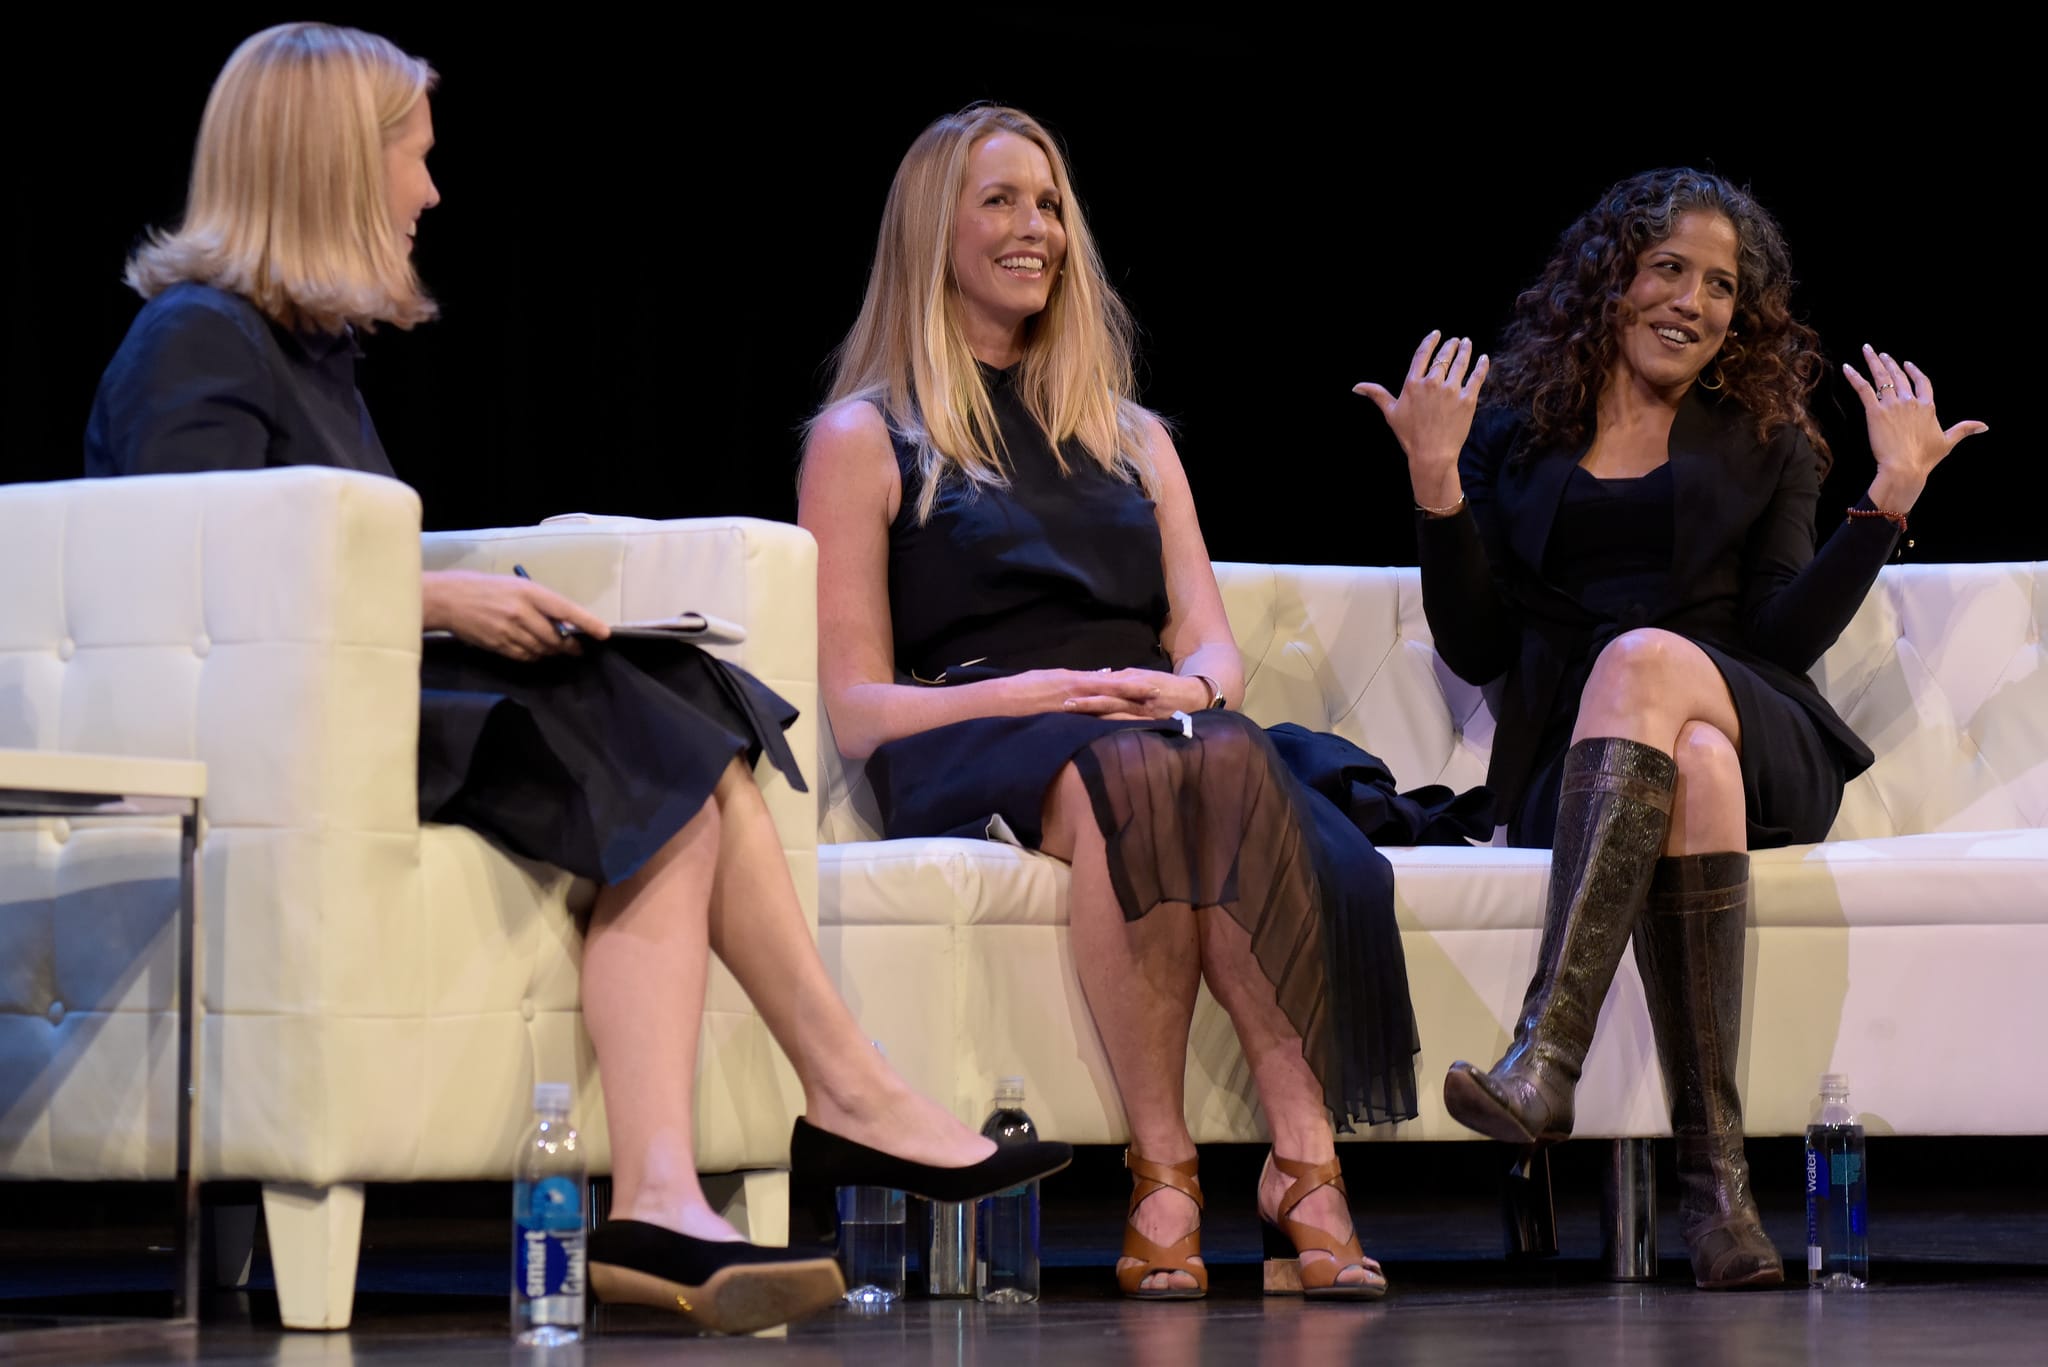 Laurene Powell Jobs (center) at the Female Founders Conference 2016 in San Francisco.